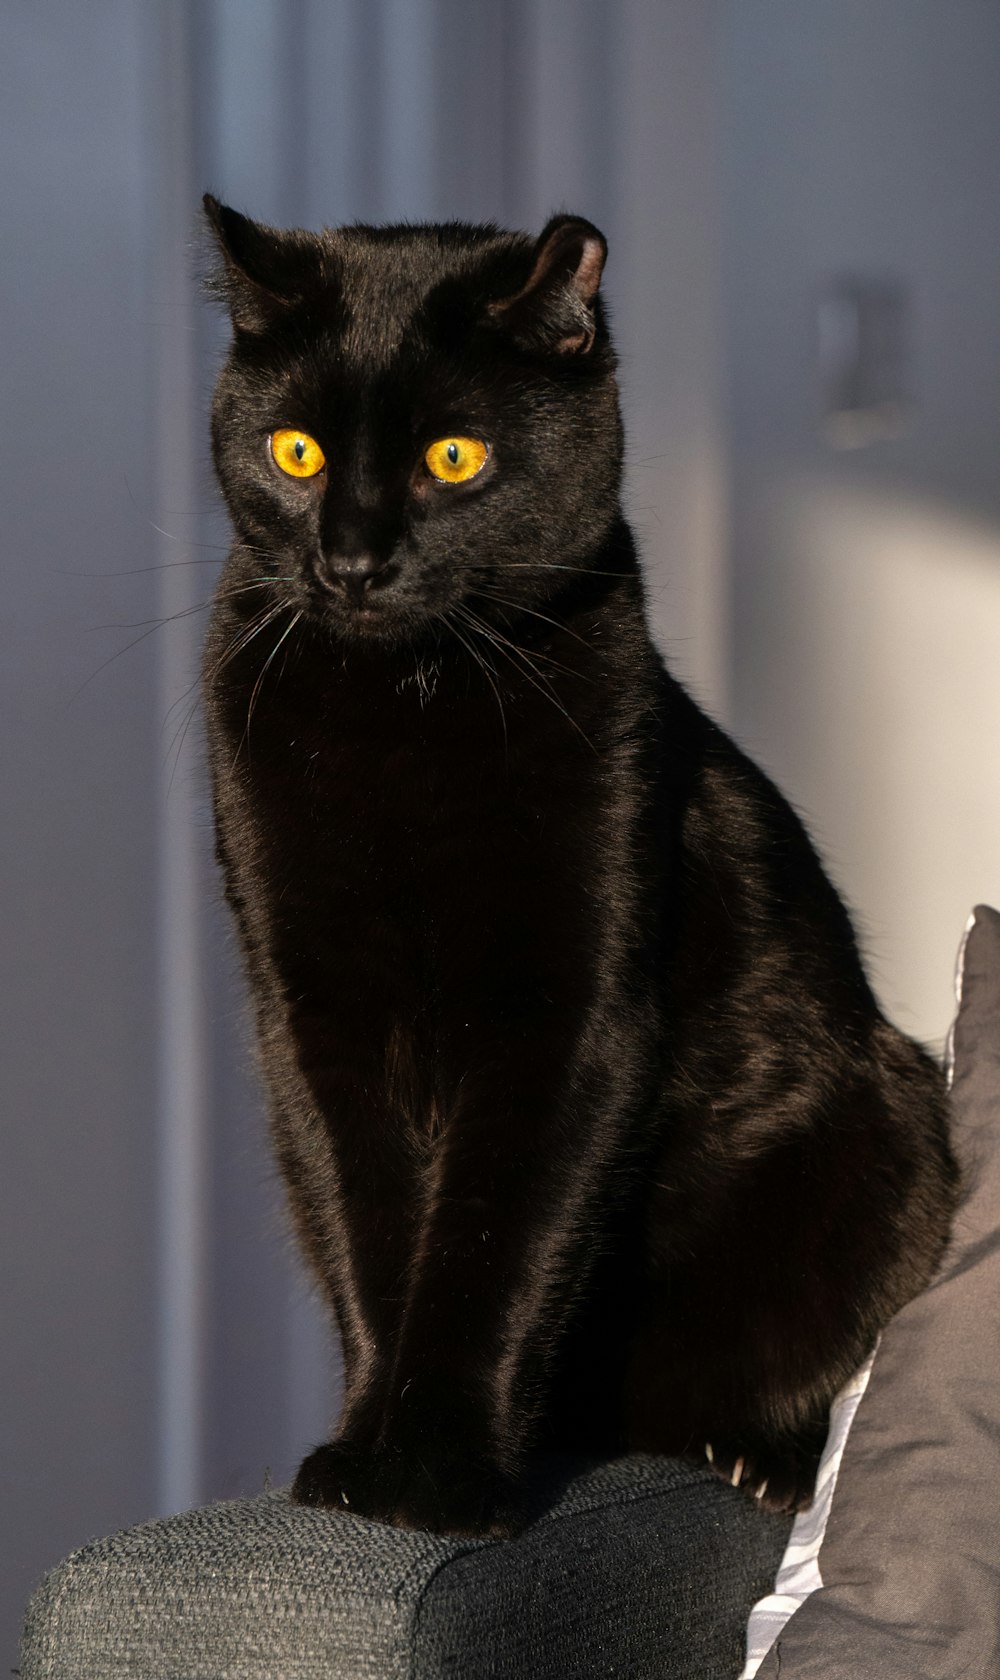 a black cat with yellow eyes sitting on a couch